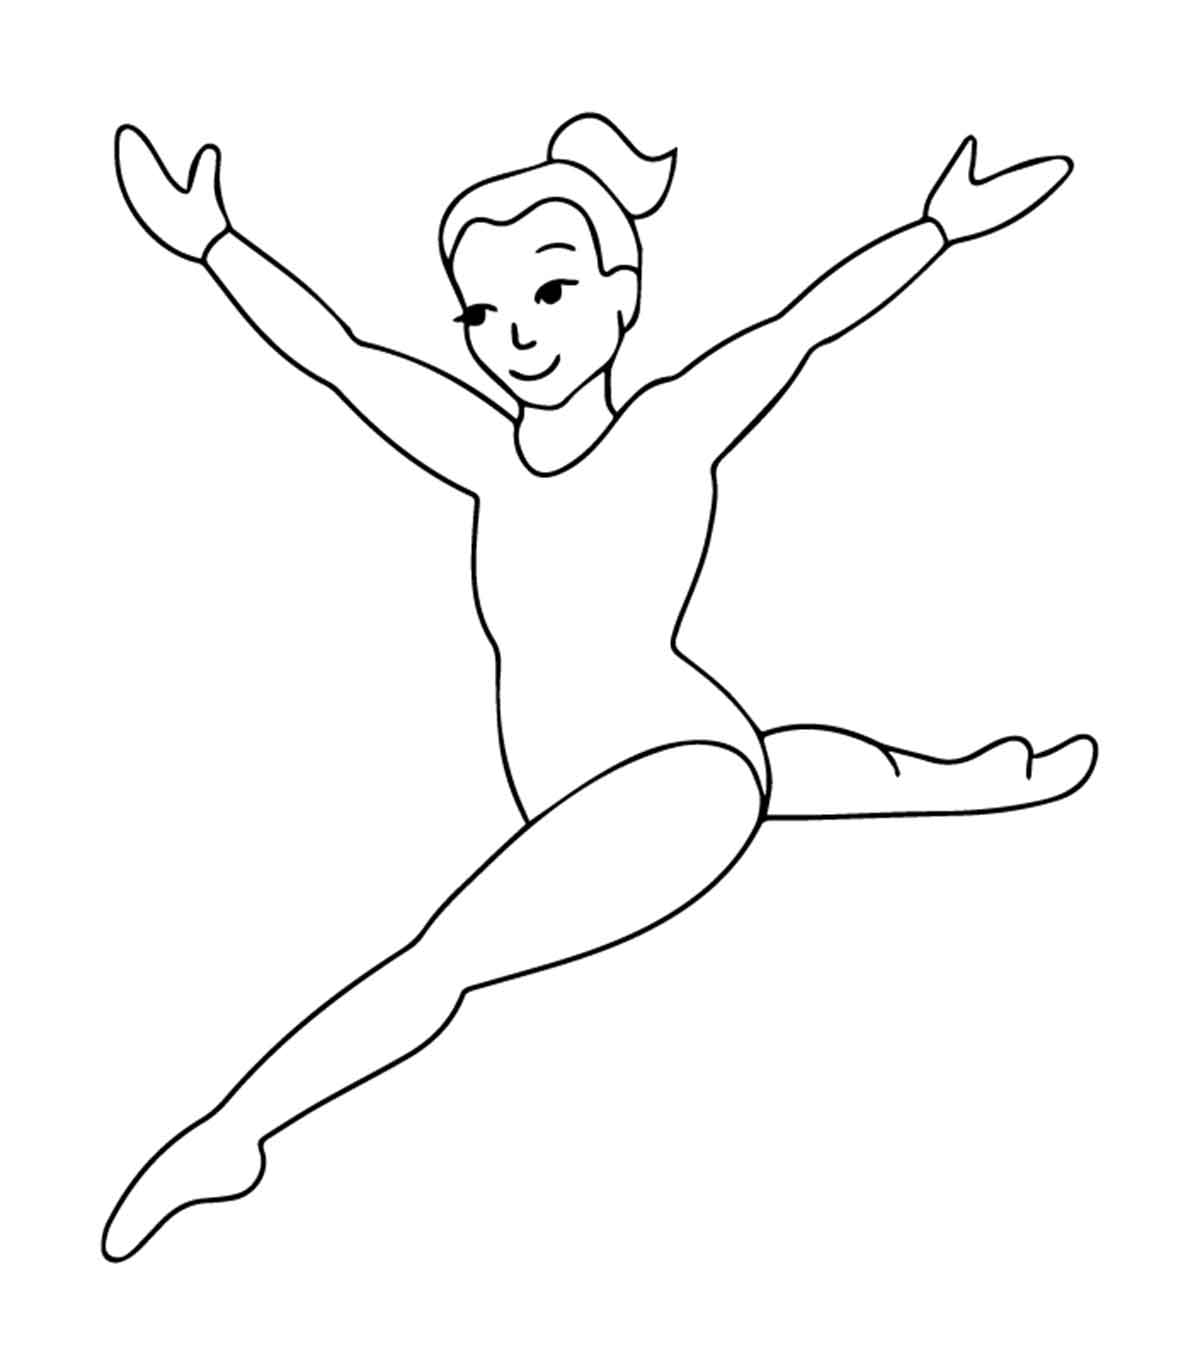 20 Best Olympics Coloring Pages For Toddlers_image